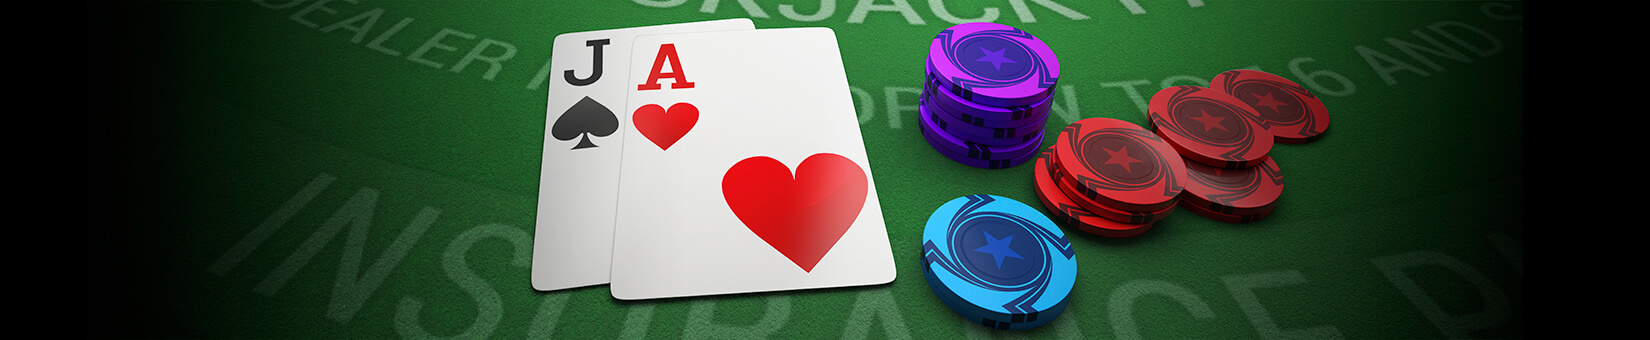 blackjack table, cards and chips